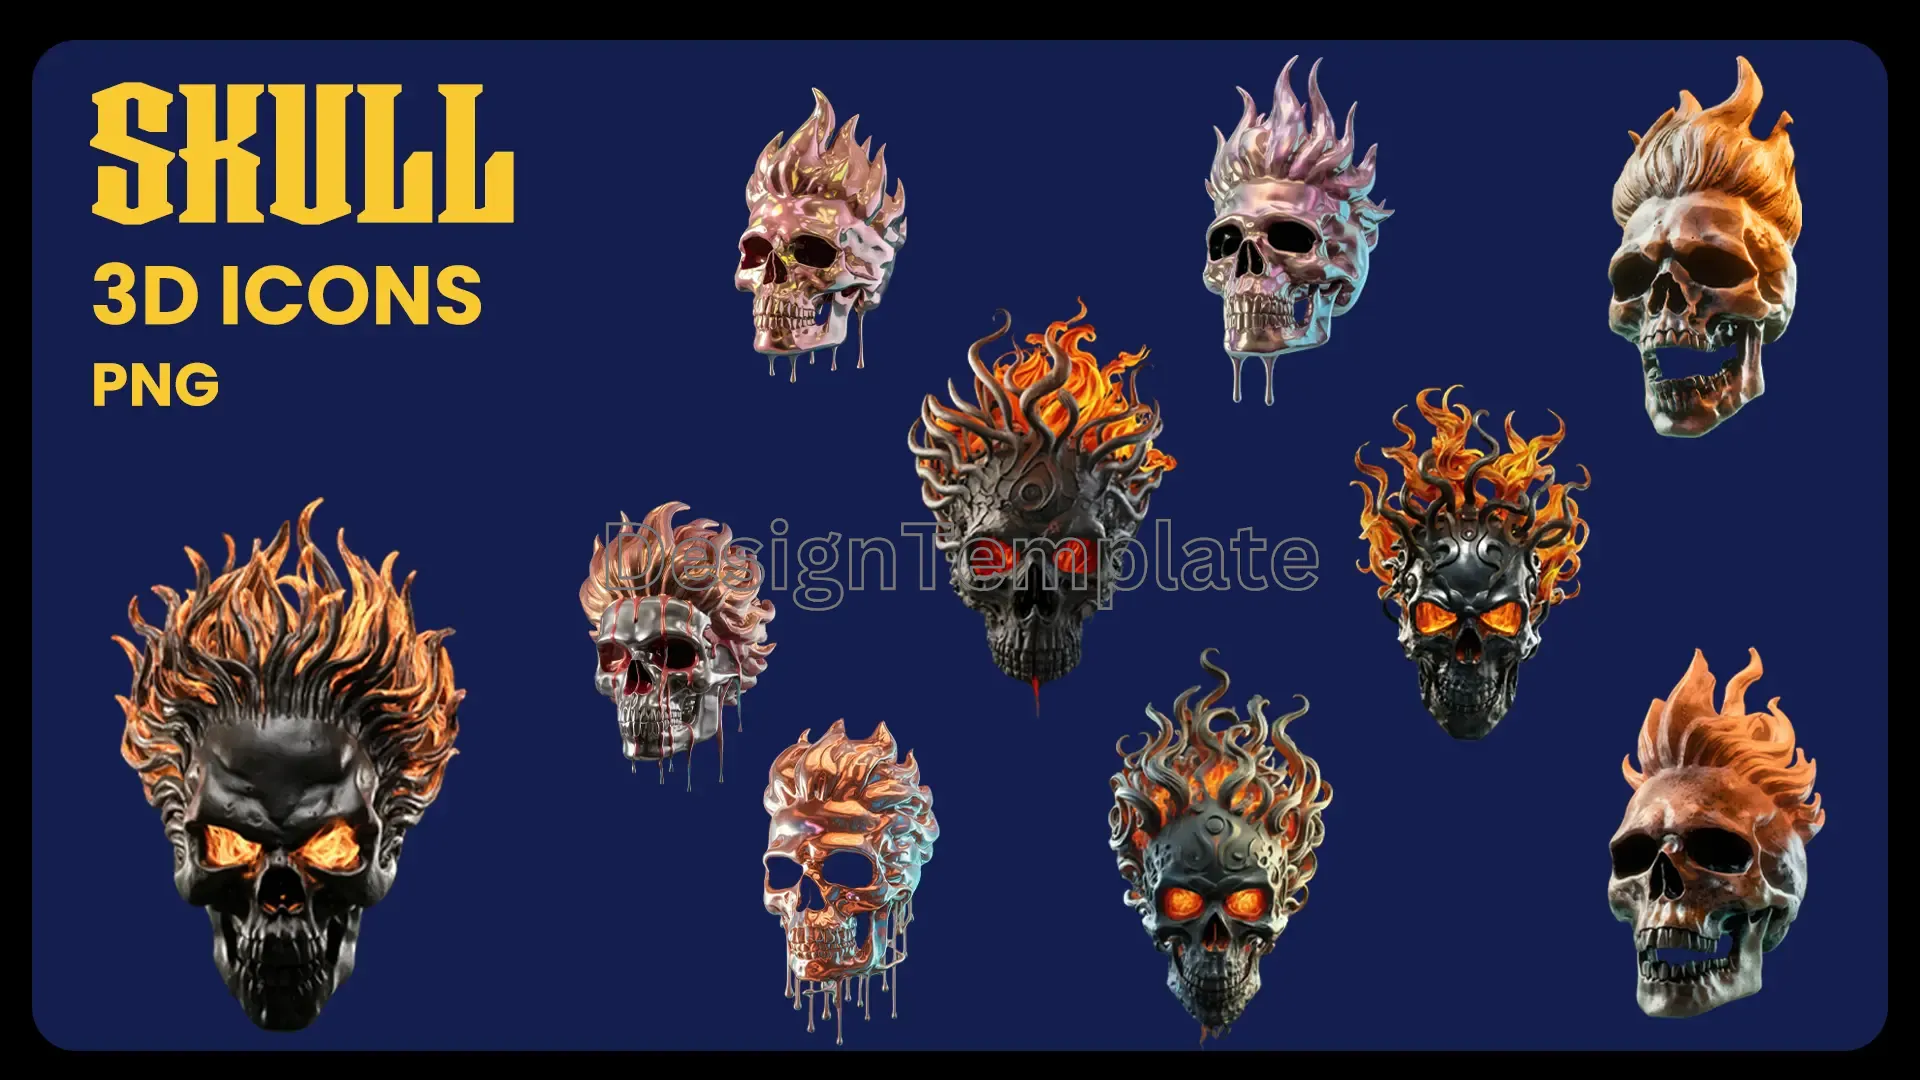 High-Quality Spooky 3D Skull Elements Pack